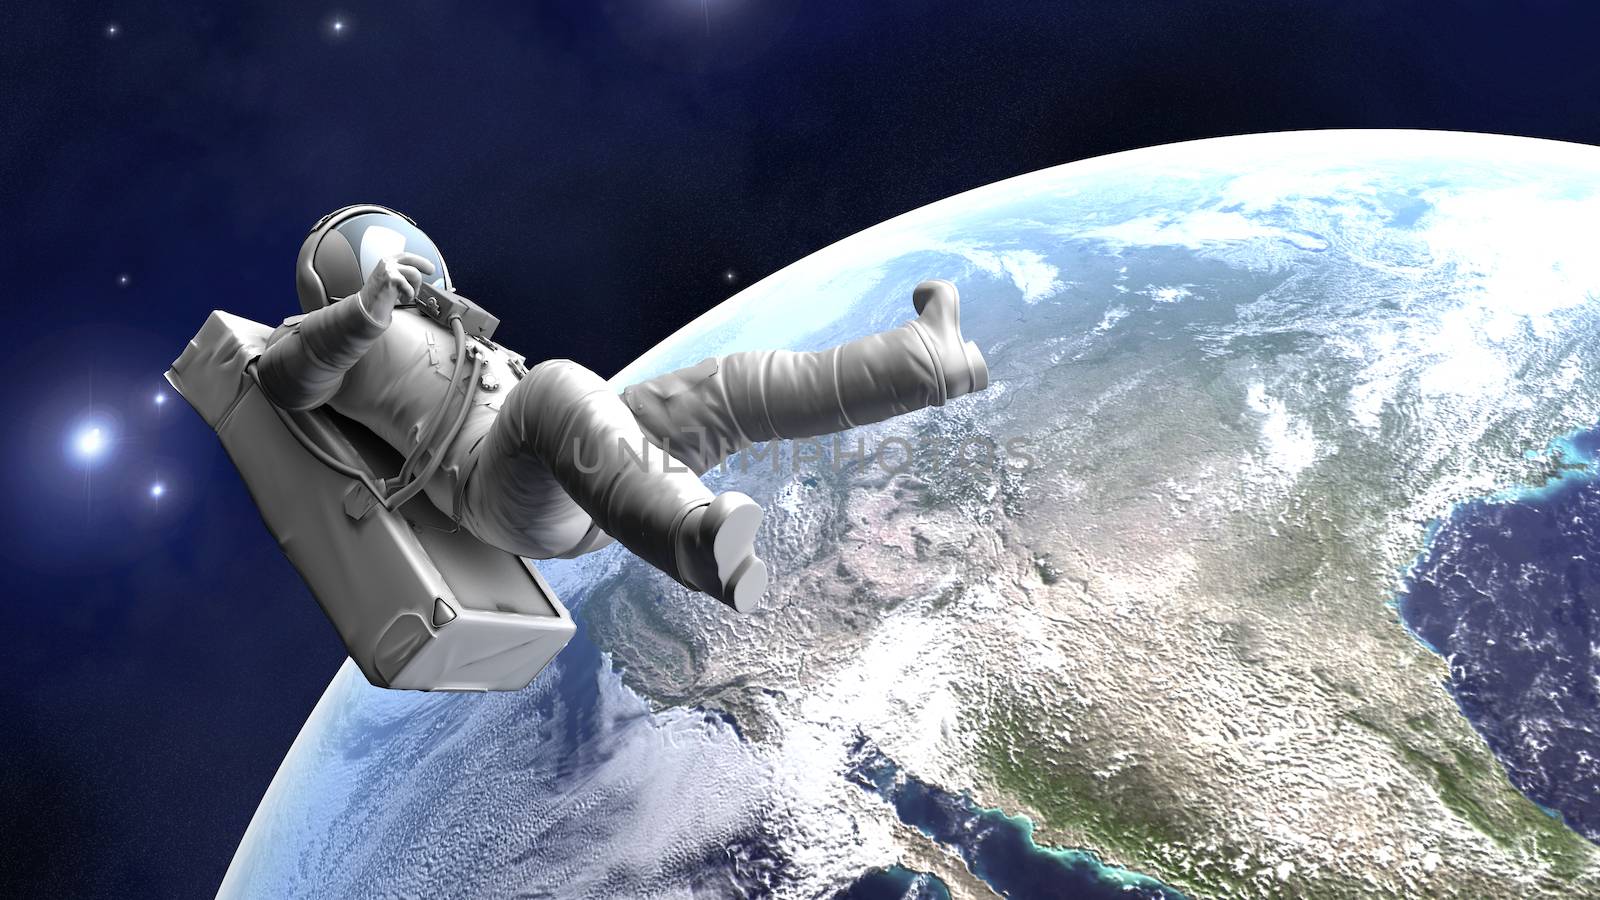 A Astronaut floating over the earth. 3D illustration.